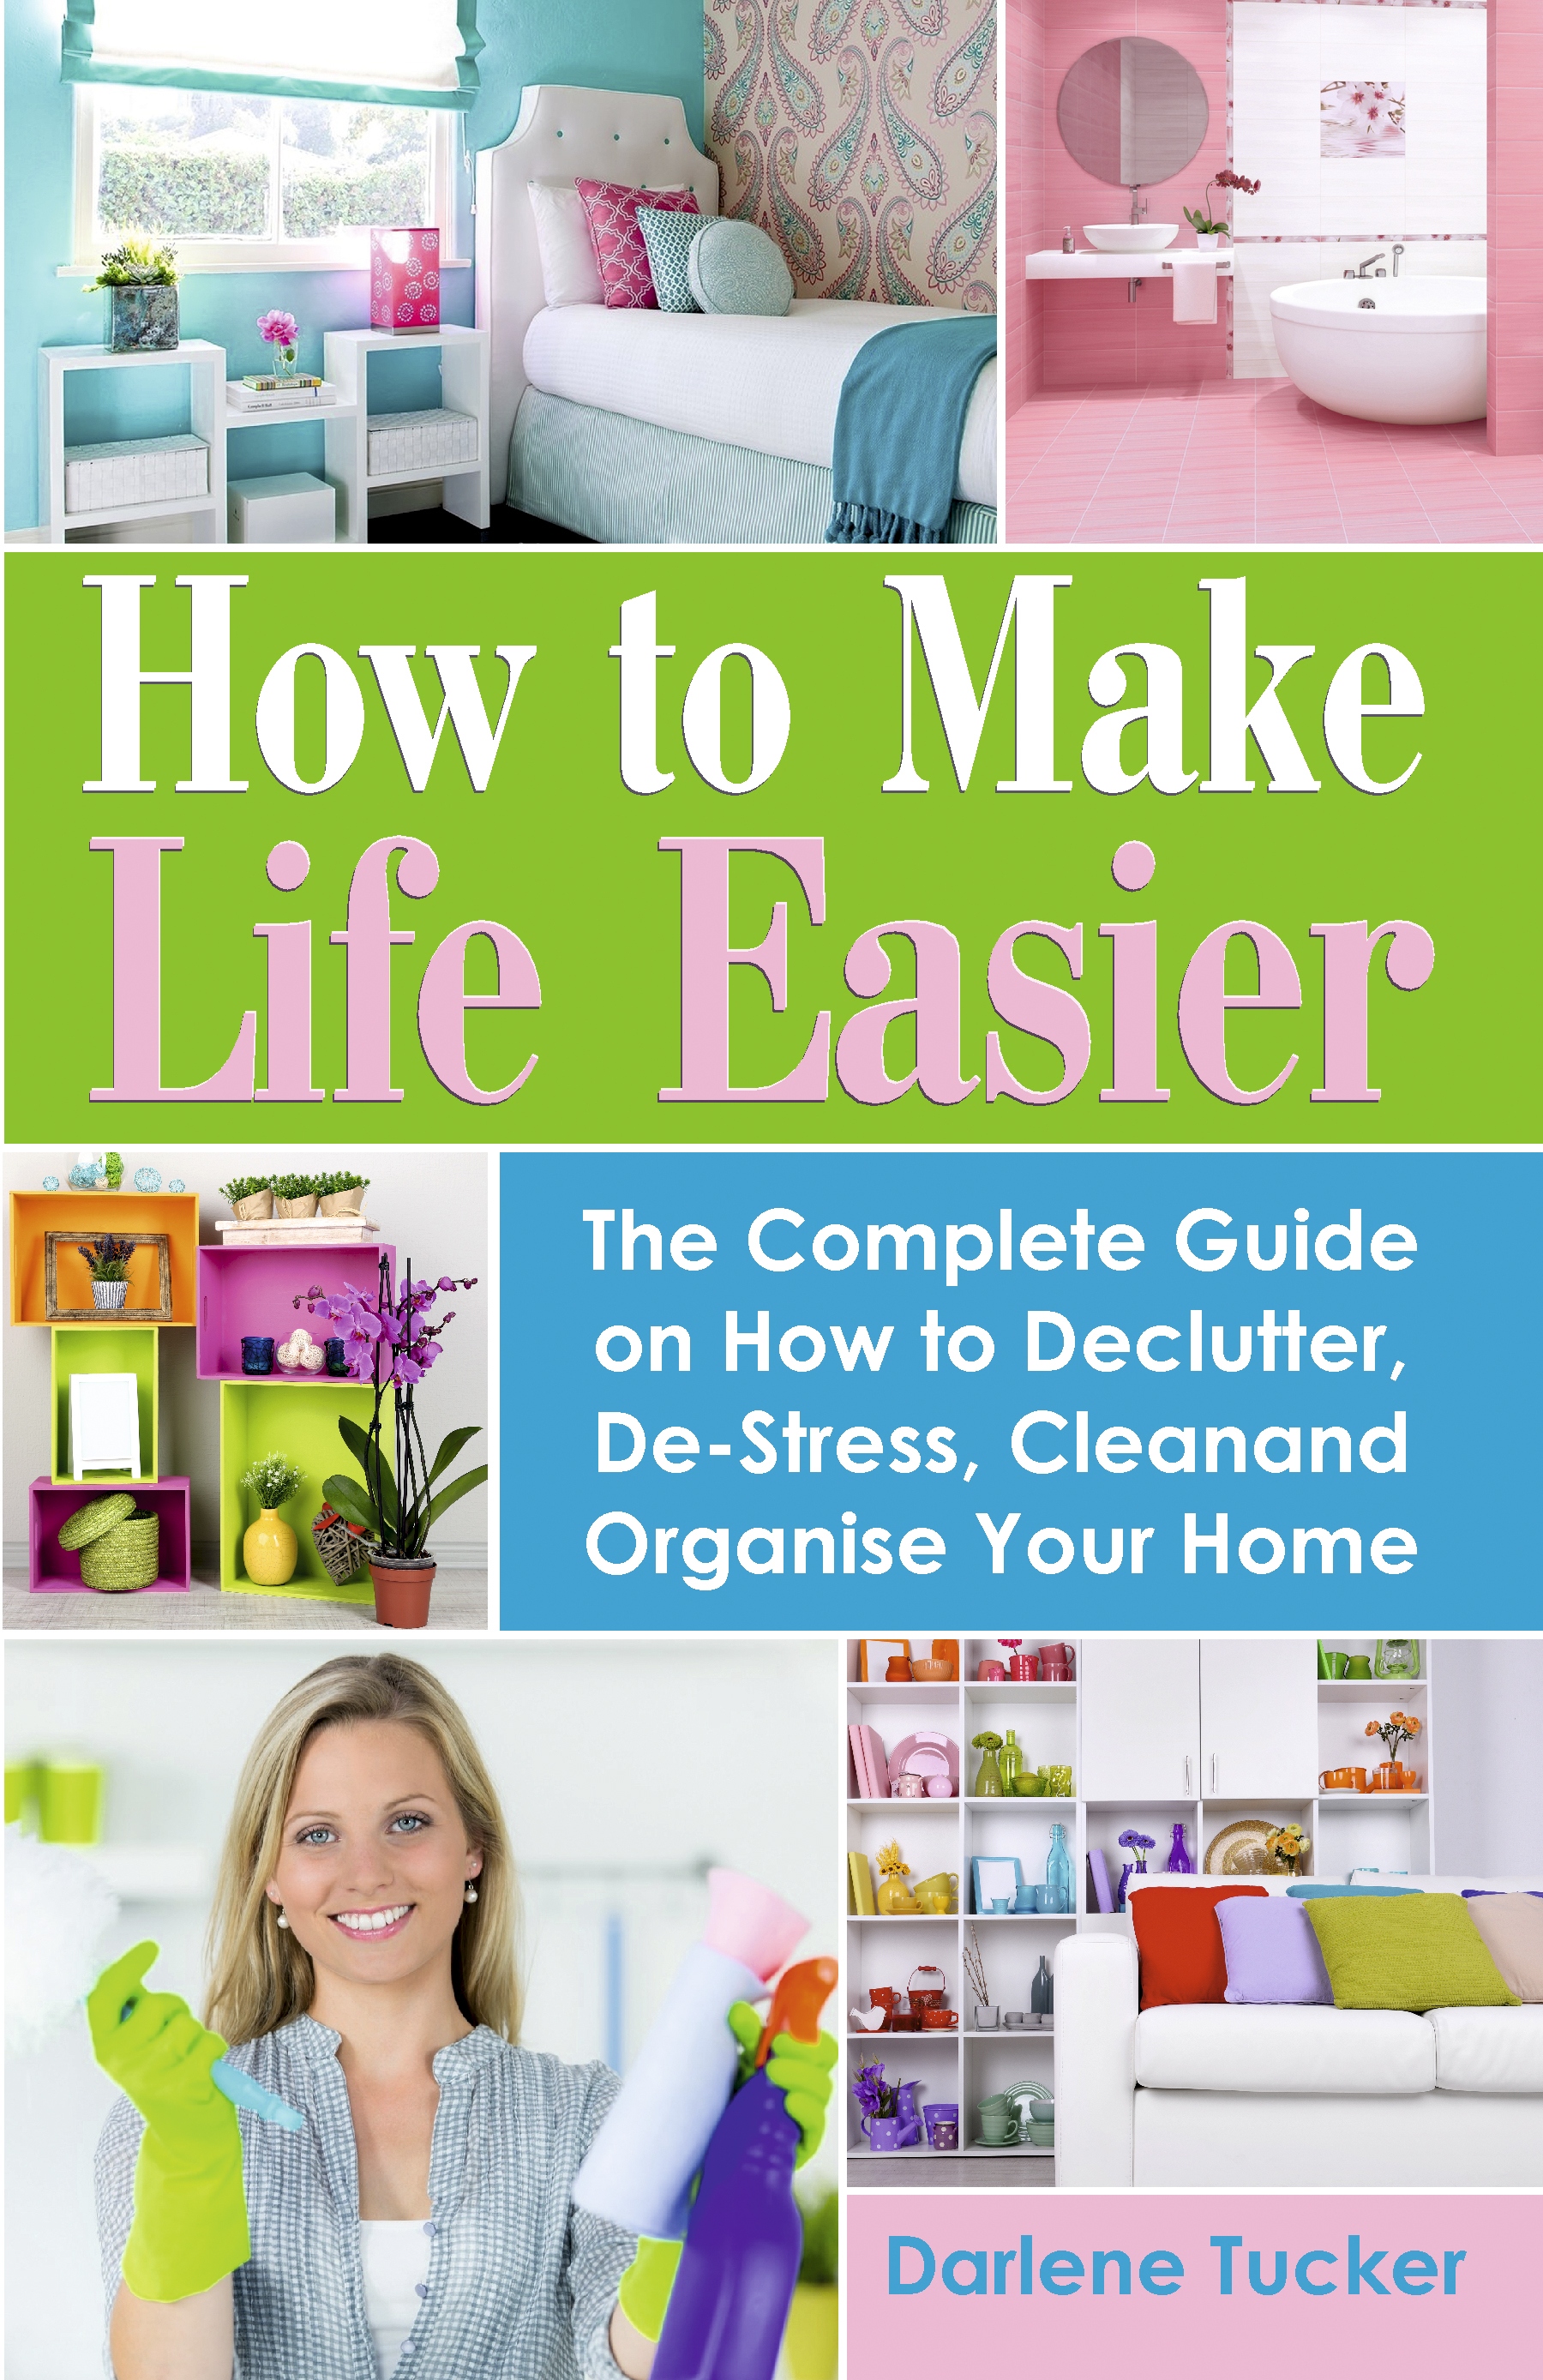 FREE: How to Make Life Easier: The Complete Guide on How to Declutter, De-Stress, Clean and Organize Your Home by Darlene Tucker by Darlene Tucker